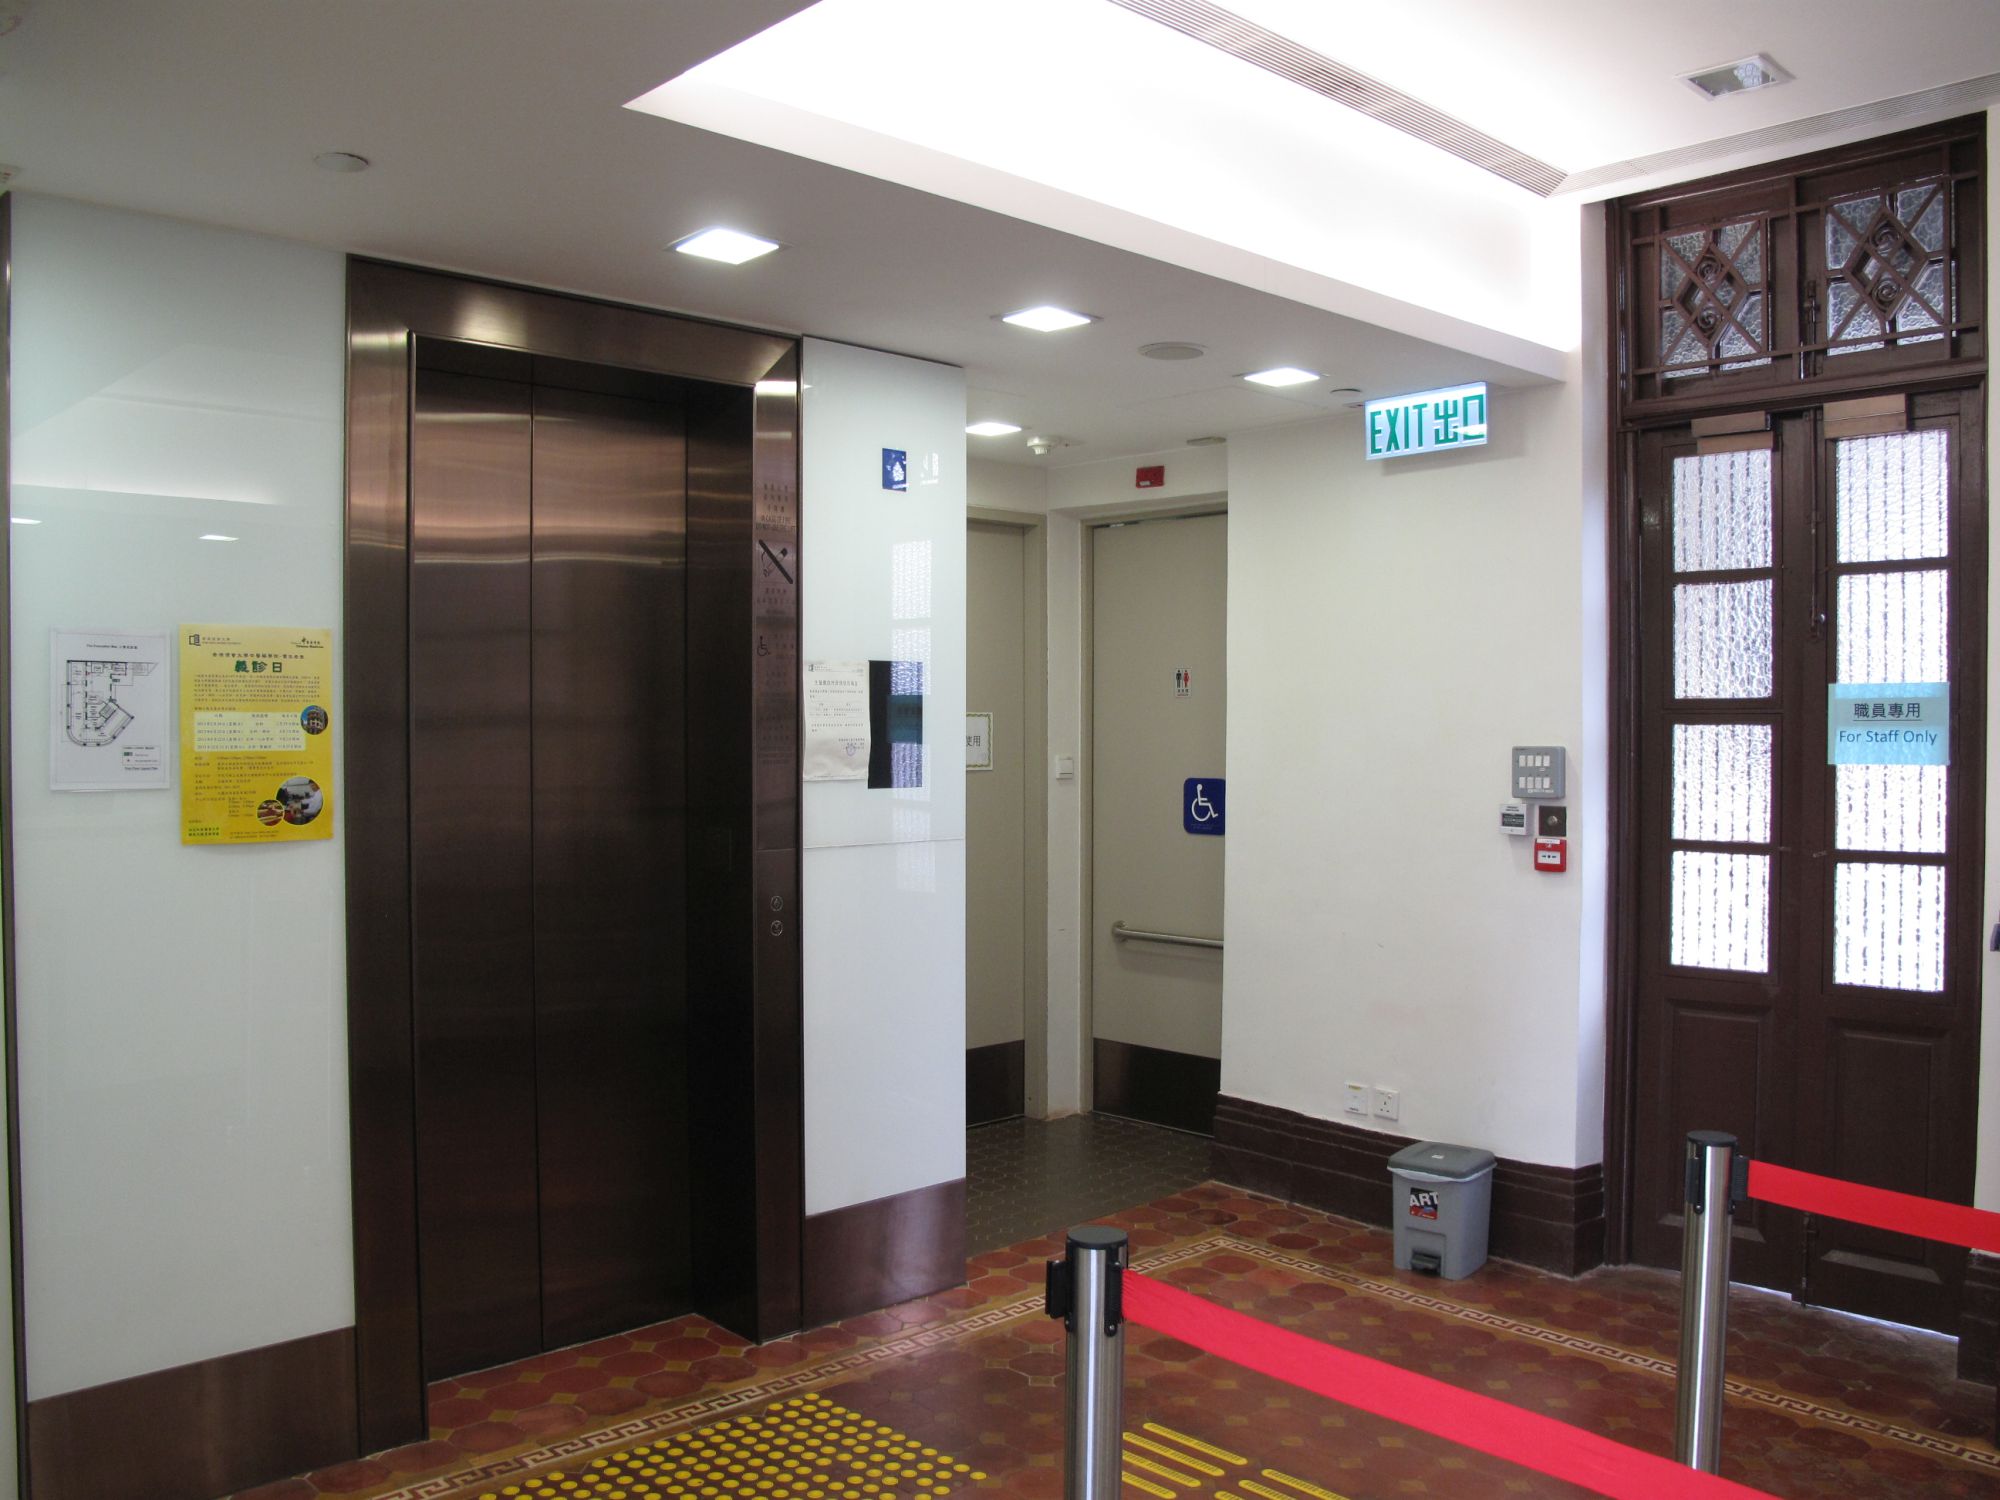 The revitalisation works included the addition of a lift, toilets for people with disabilities, and so on.